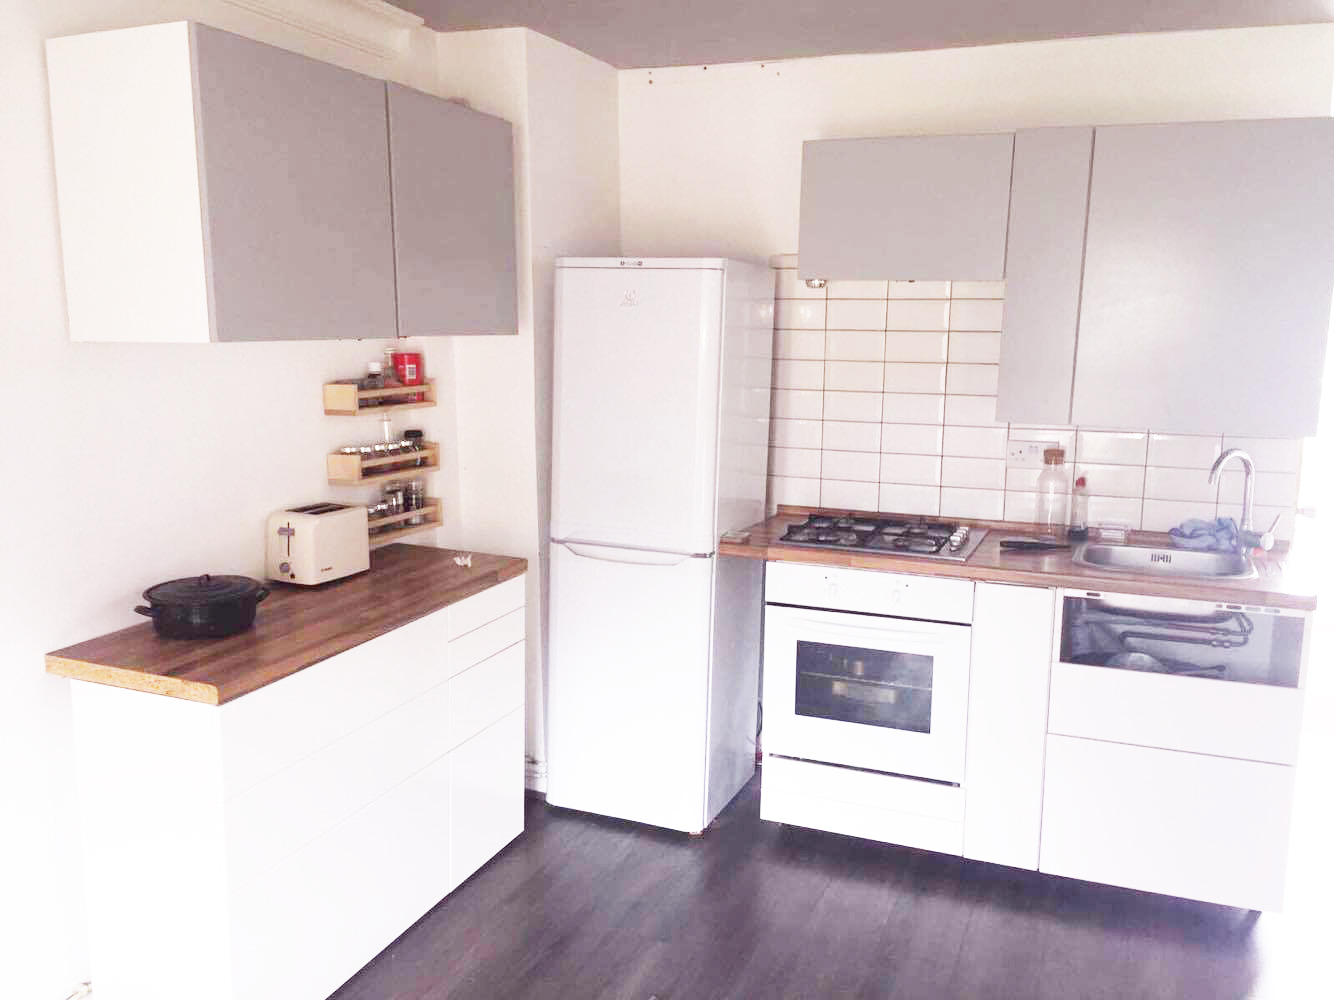 Well located 2 bedroom flat in Hoxton N1.